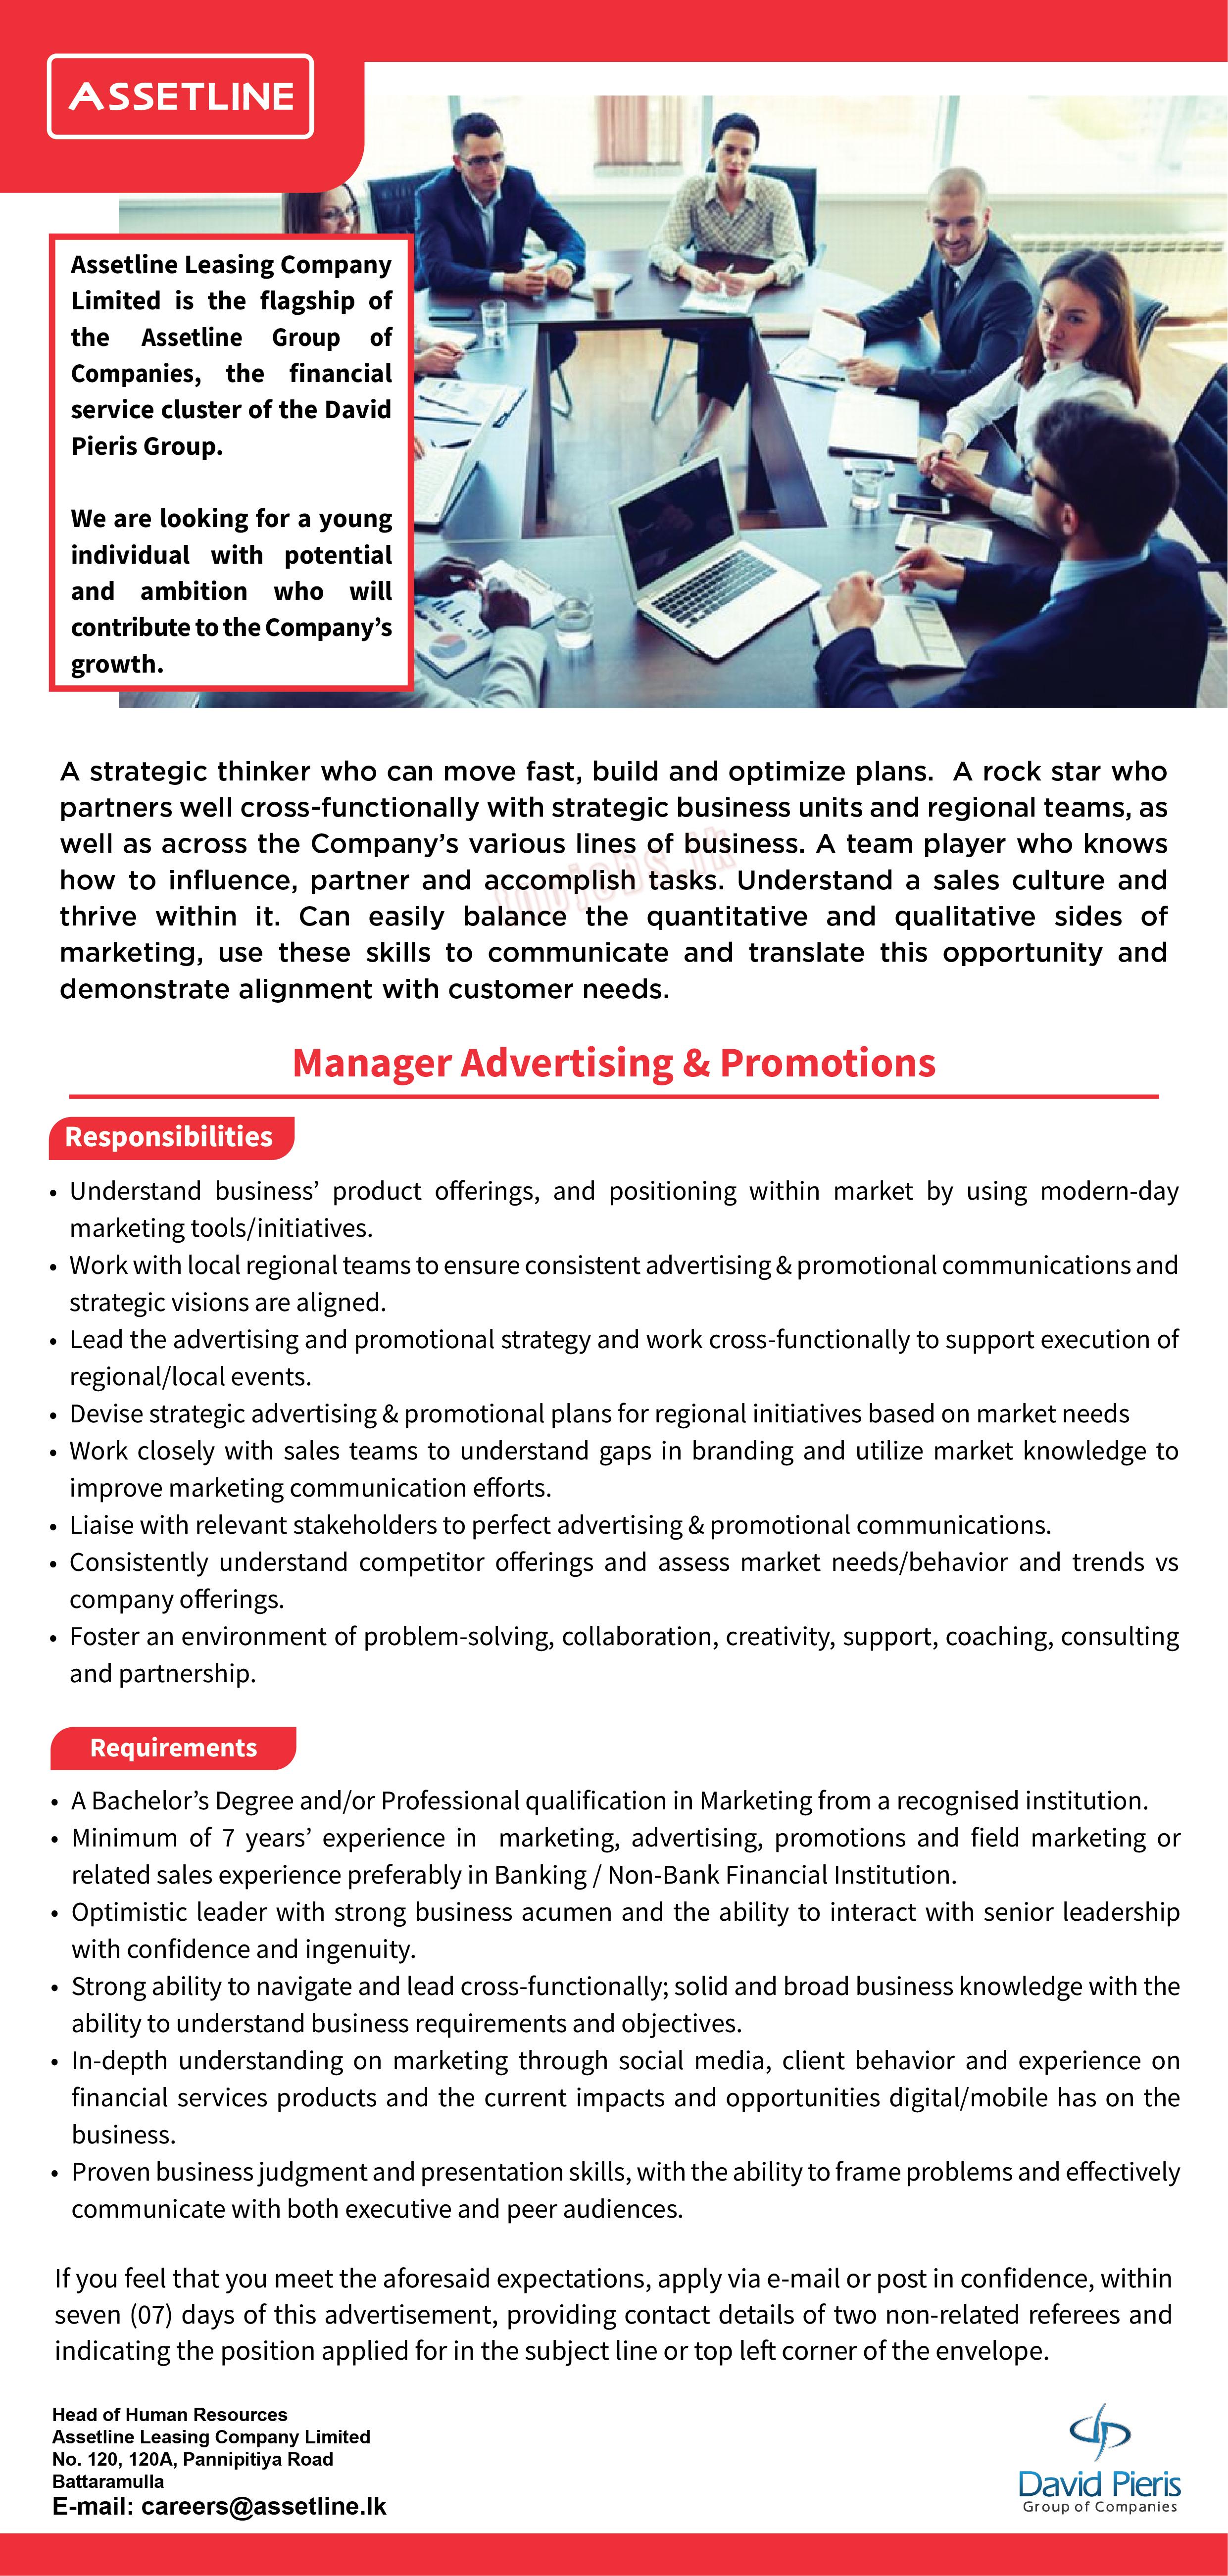 DPMC Assetline Vacancies 2022 for Manager of Advertising & Promotions